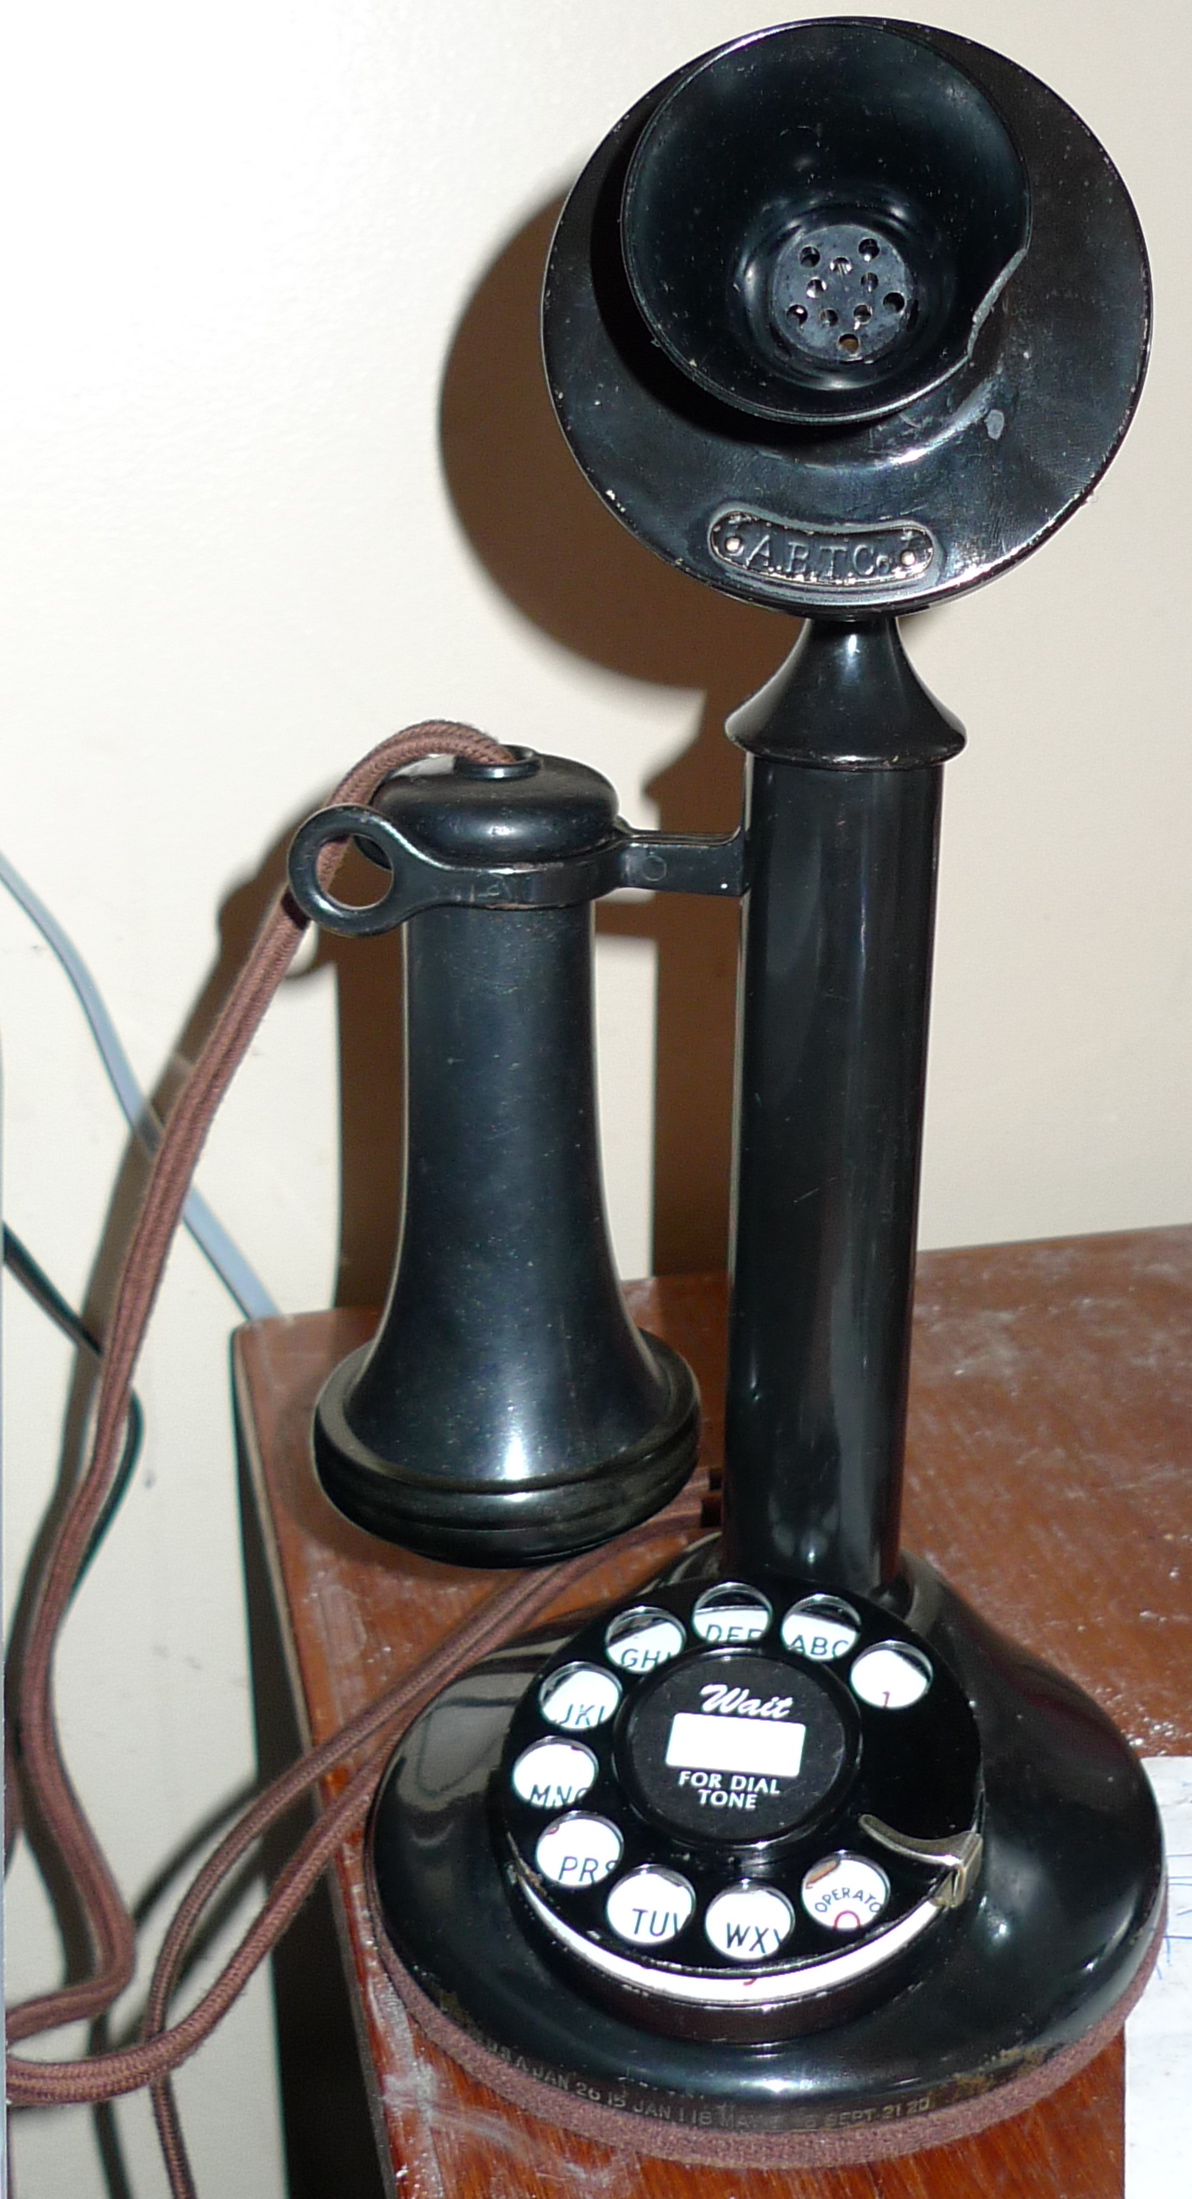 Candlestick Phone No Dial